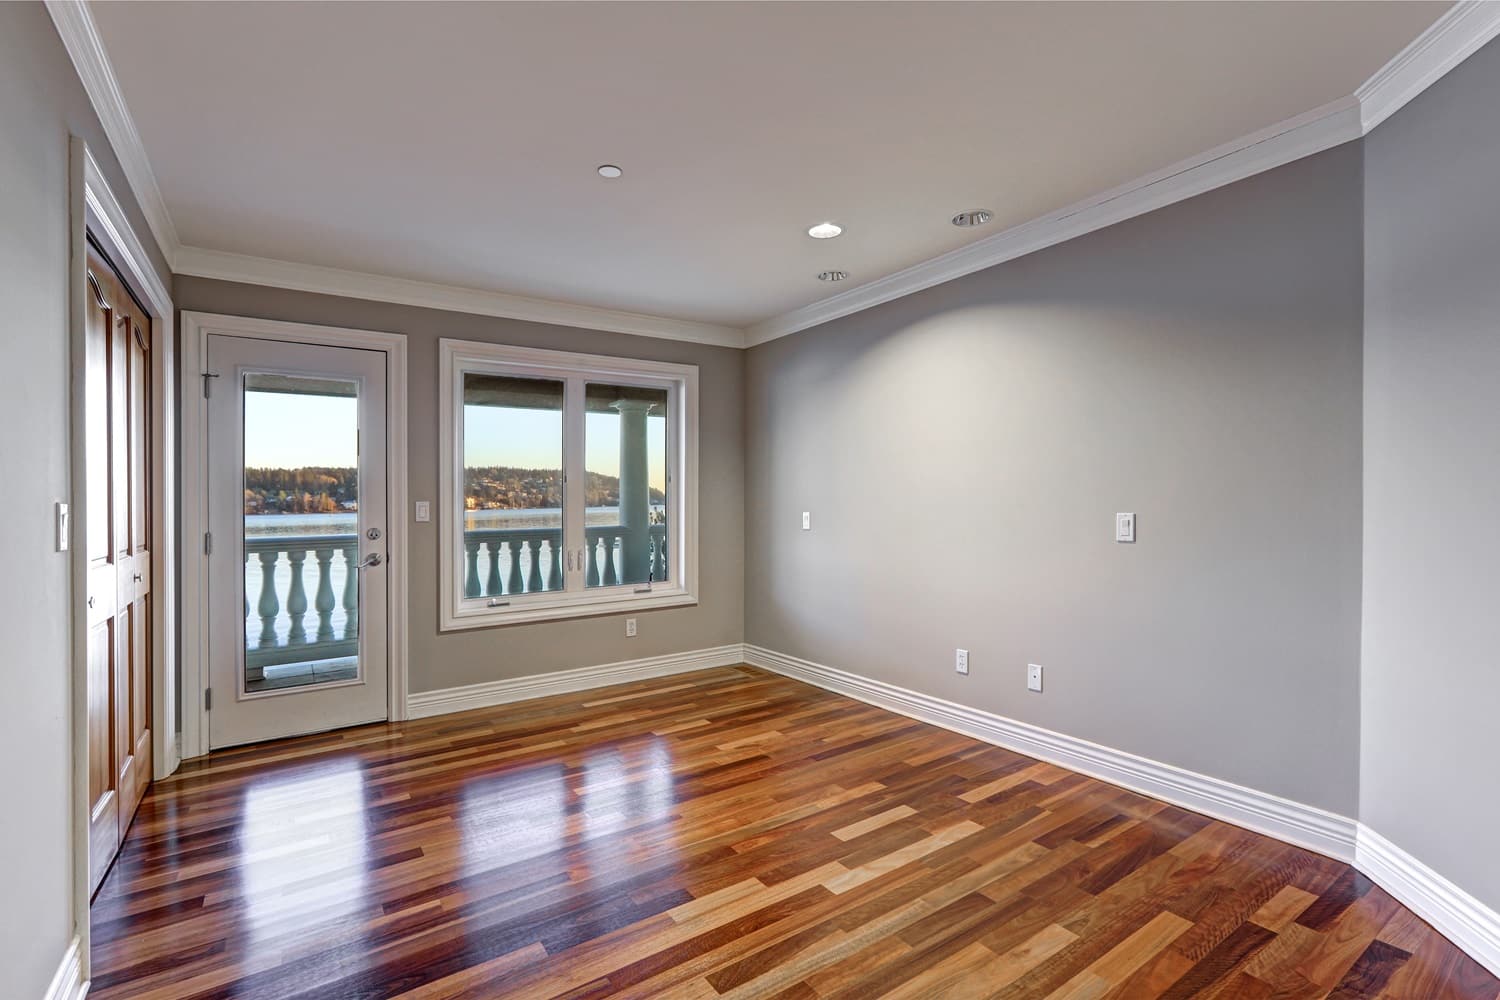 Empty room interior with soft grey walls paint color, glossy hardwood floor and door to balcony. Northwest, USA